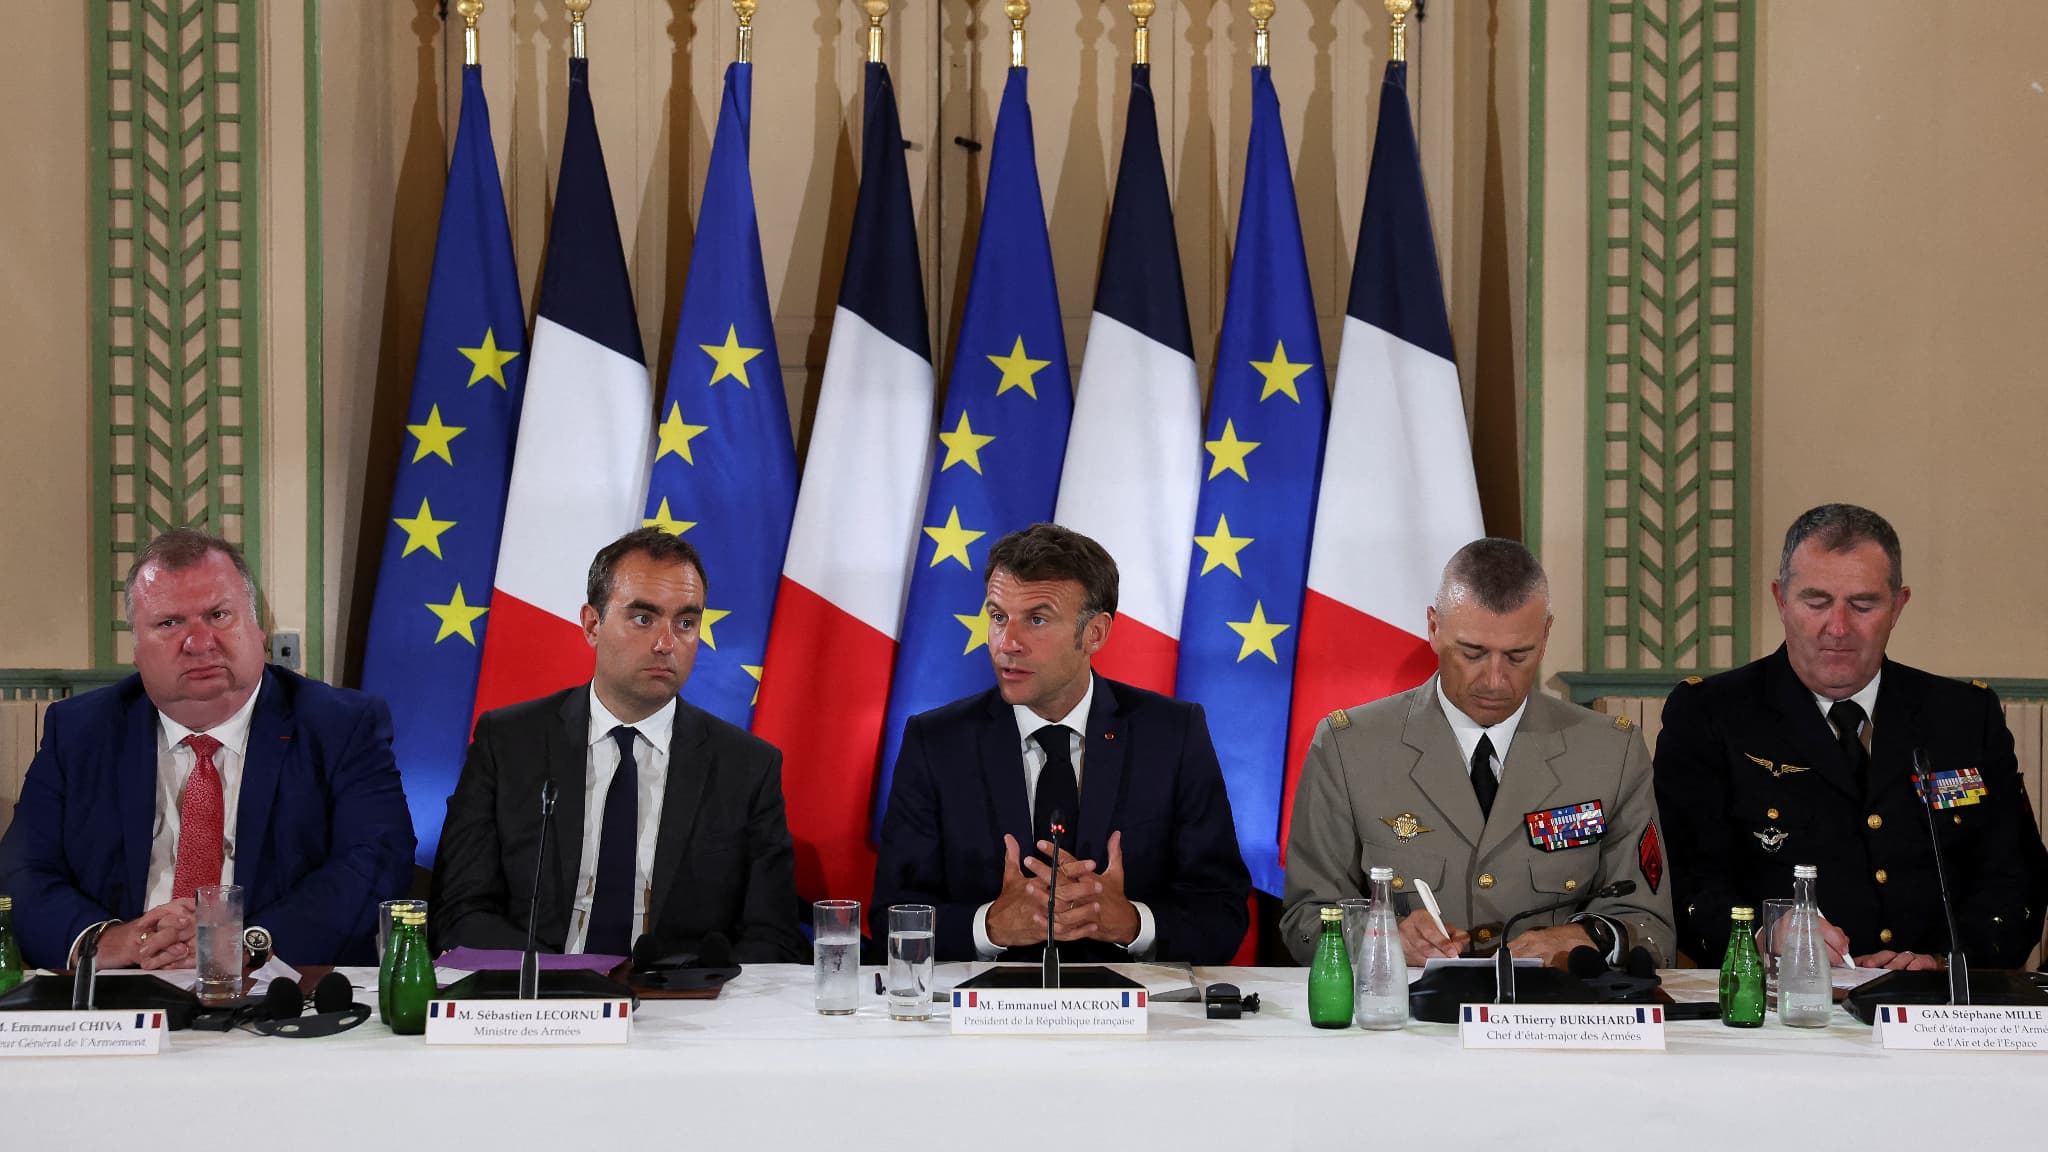 Emmanuel Macron has announced that several European countries will jointly purchase Mistral surface-to-air missiles.